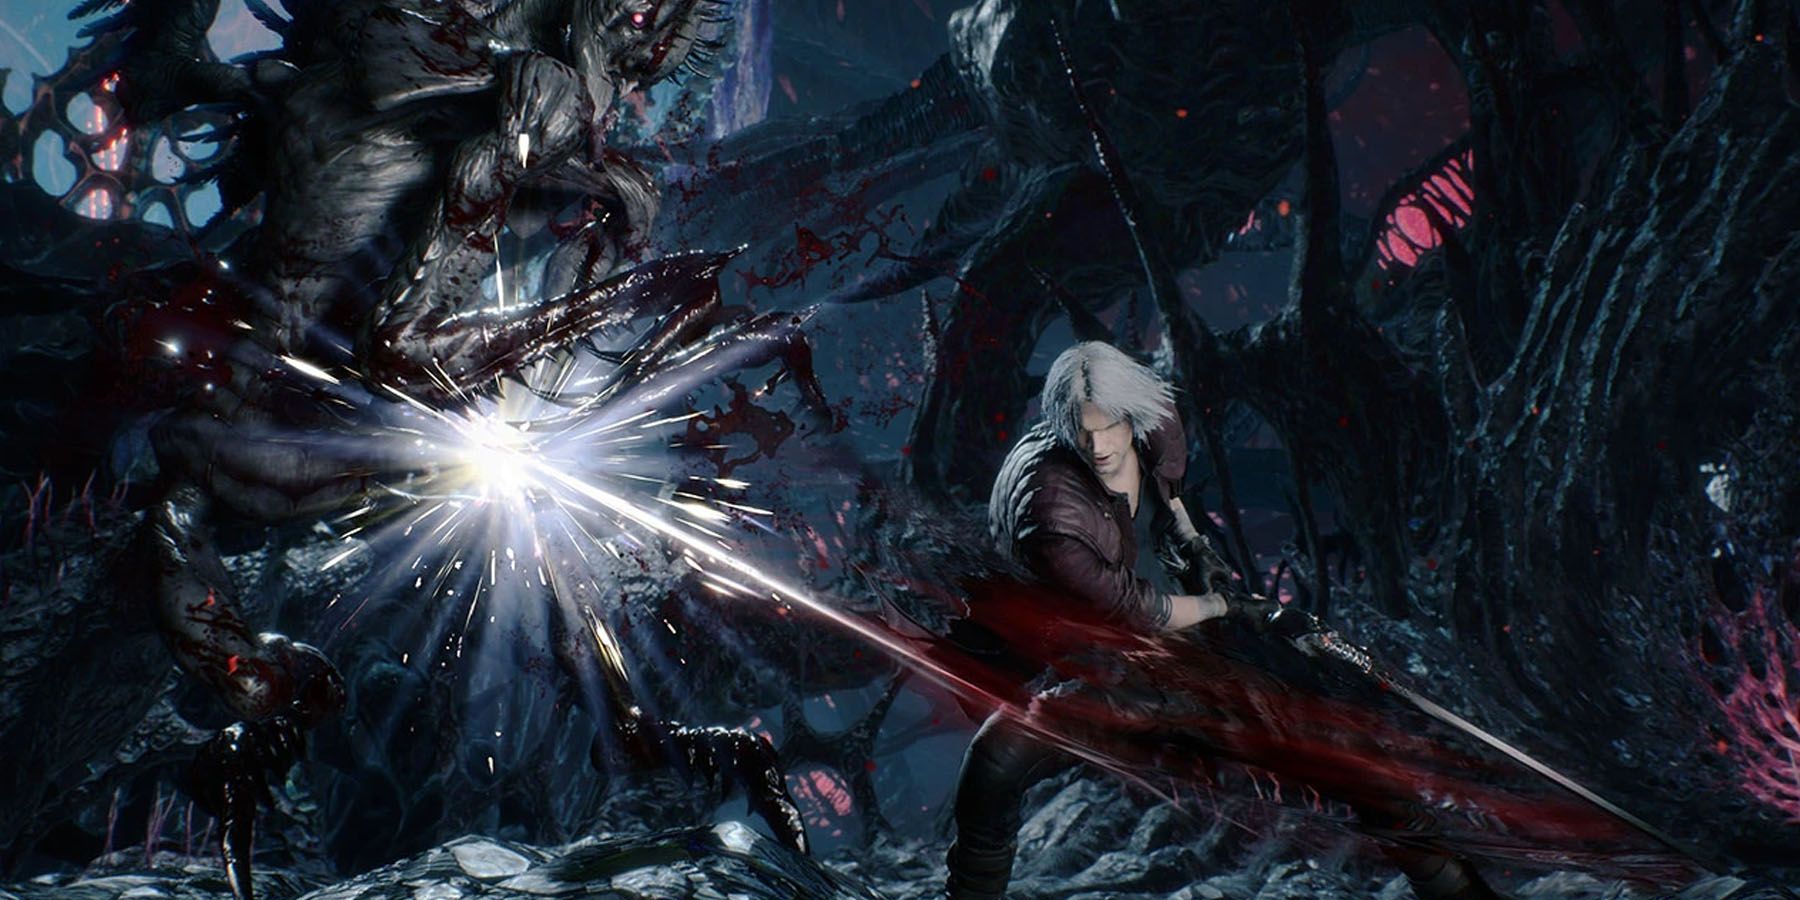 Dante attacking with his blade